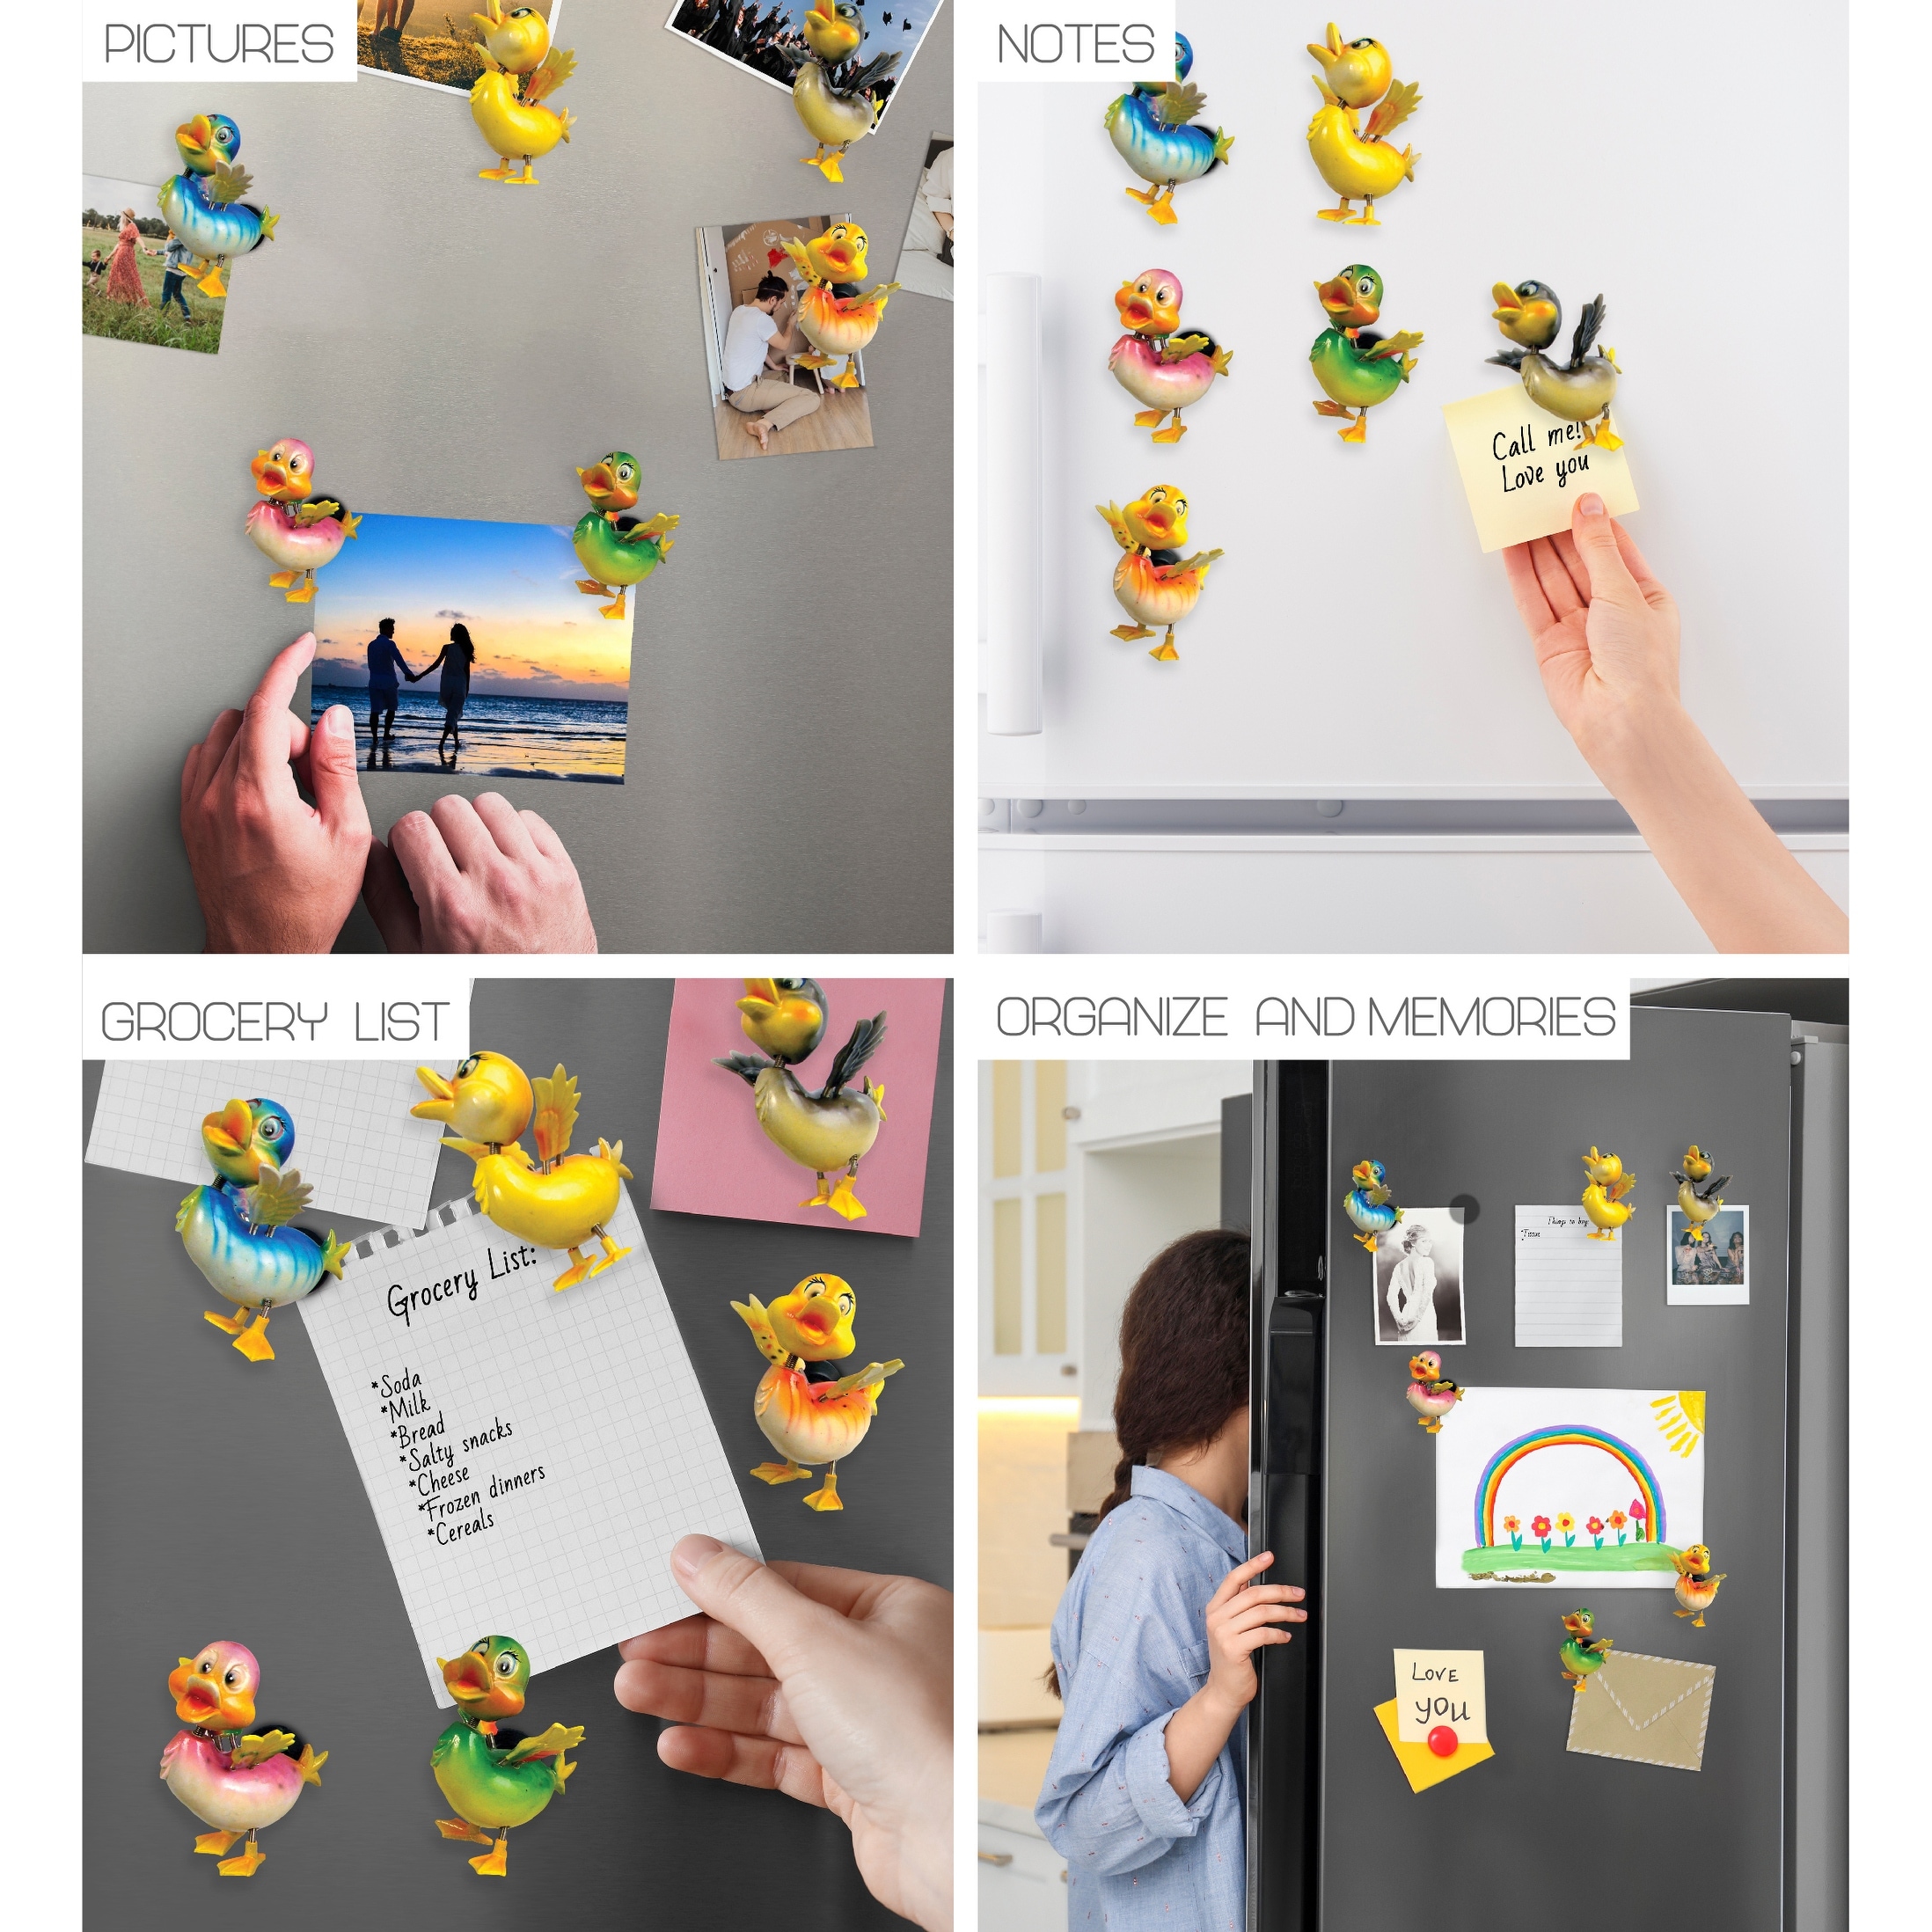 CoTa Global Duck Refrigerator Bobble Magnets Set of 6 - Multicolored 